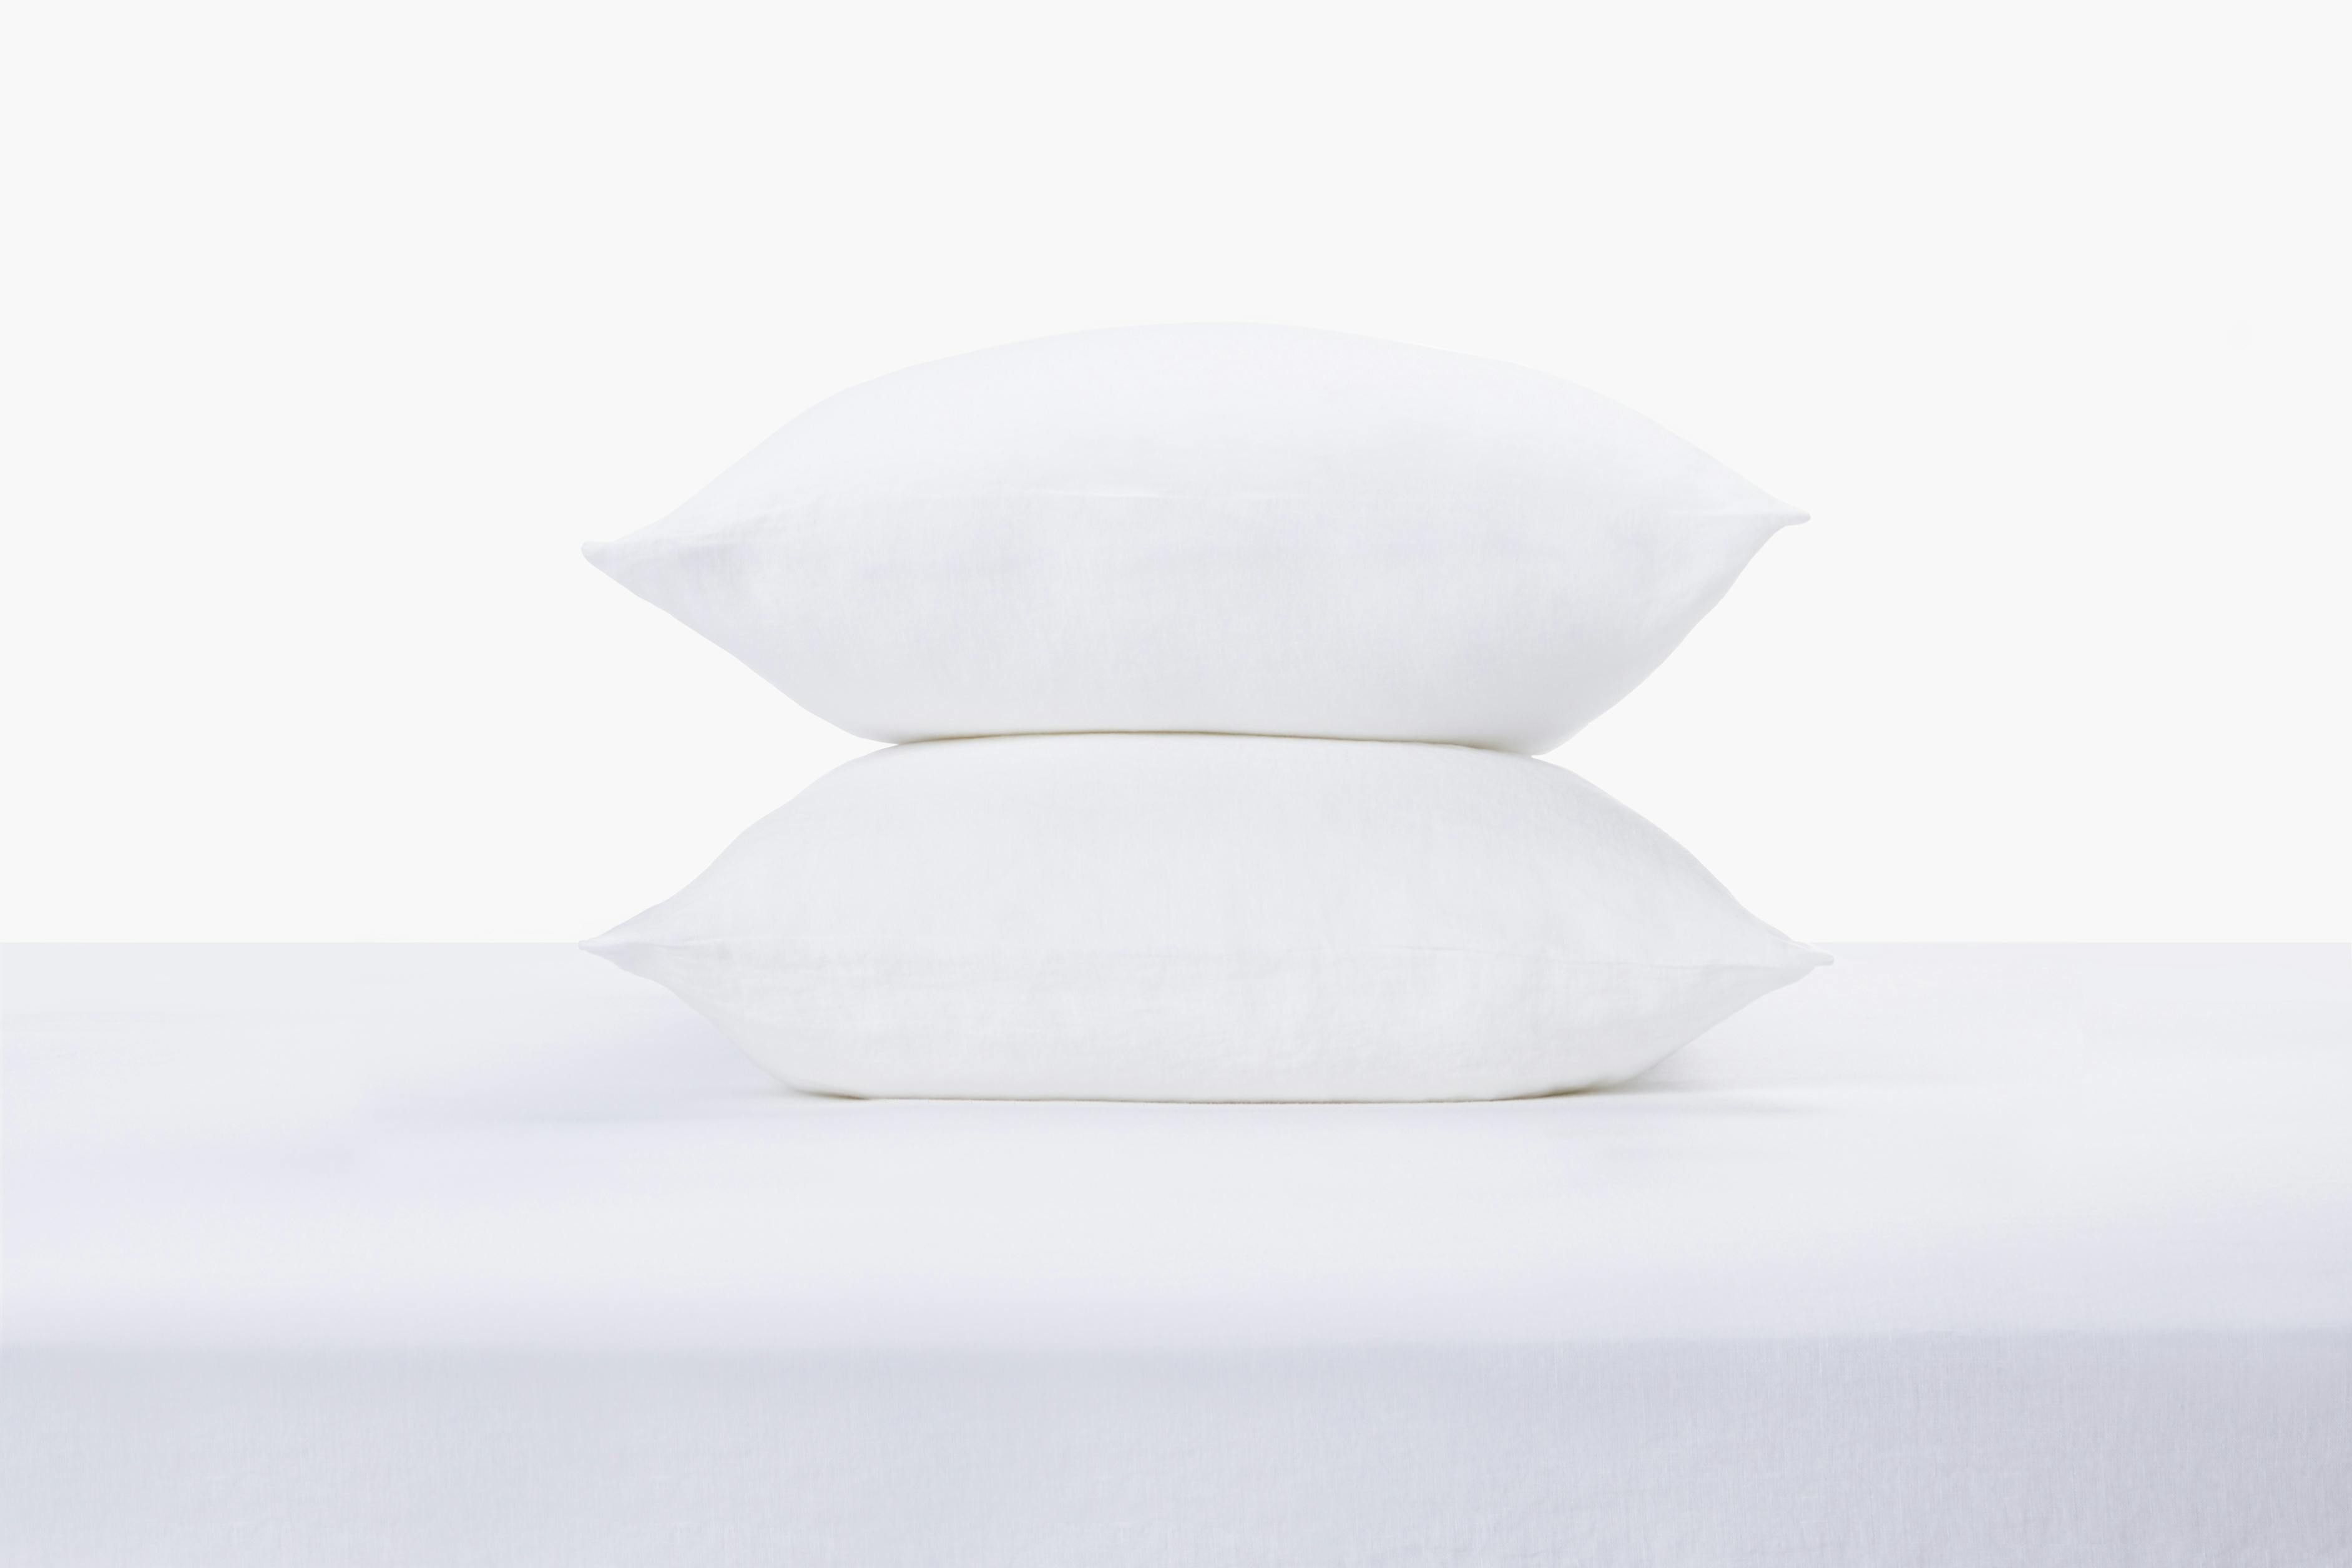 PDP Image: Linen (White) - 3:2 - Pillows Stacked